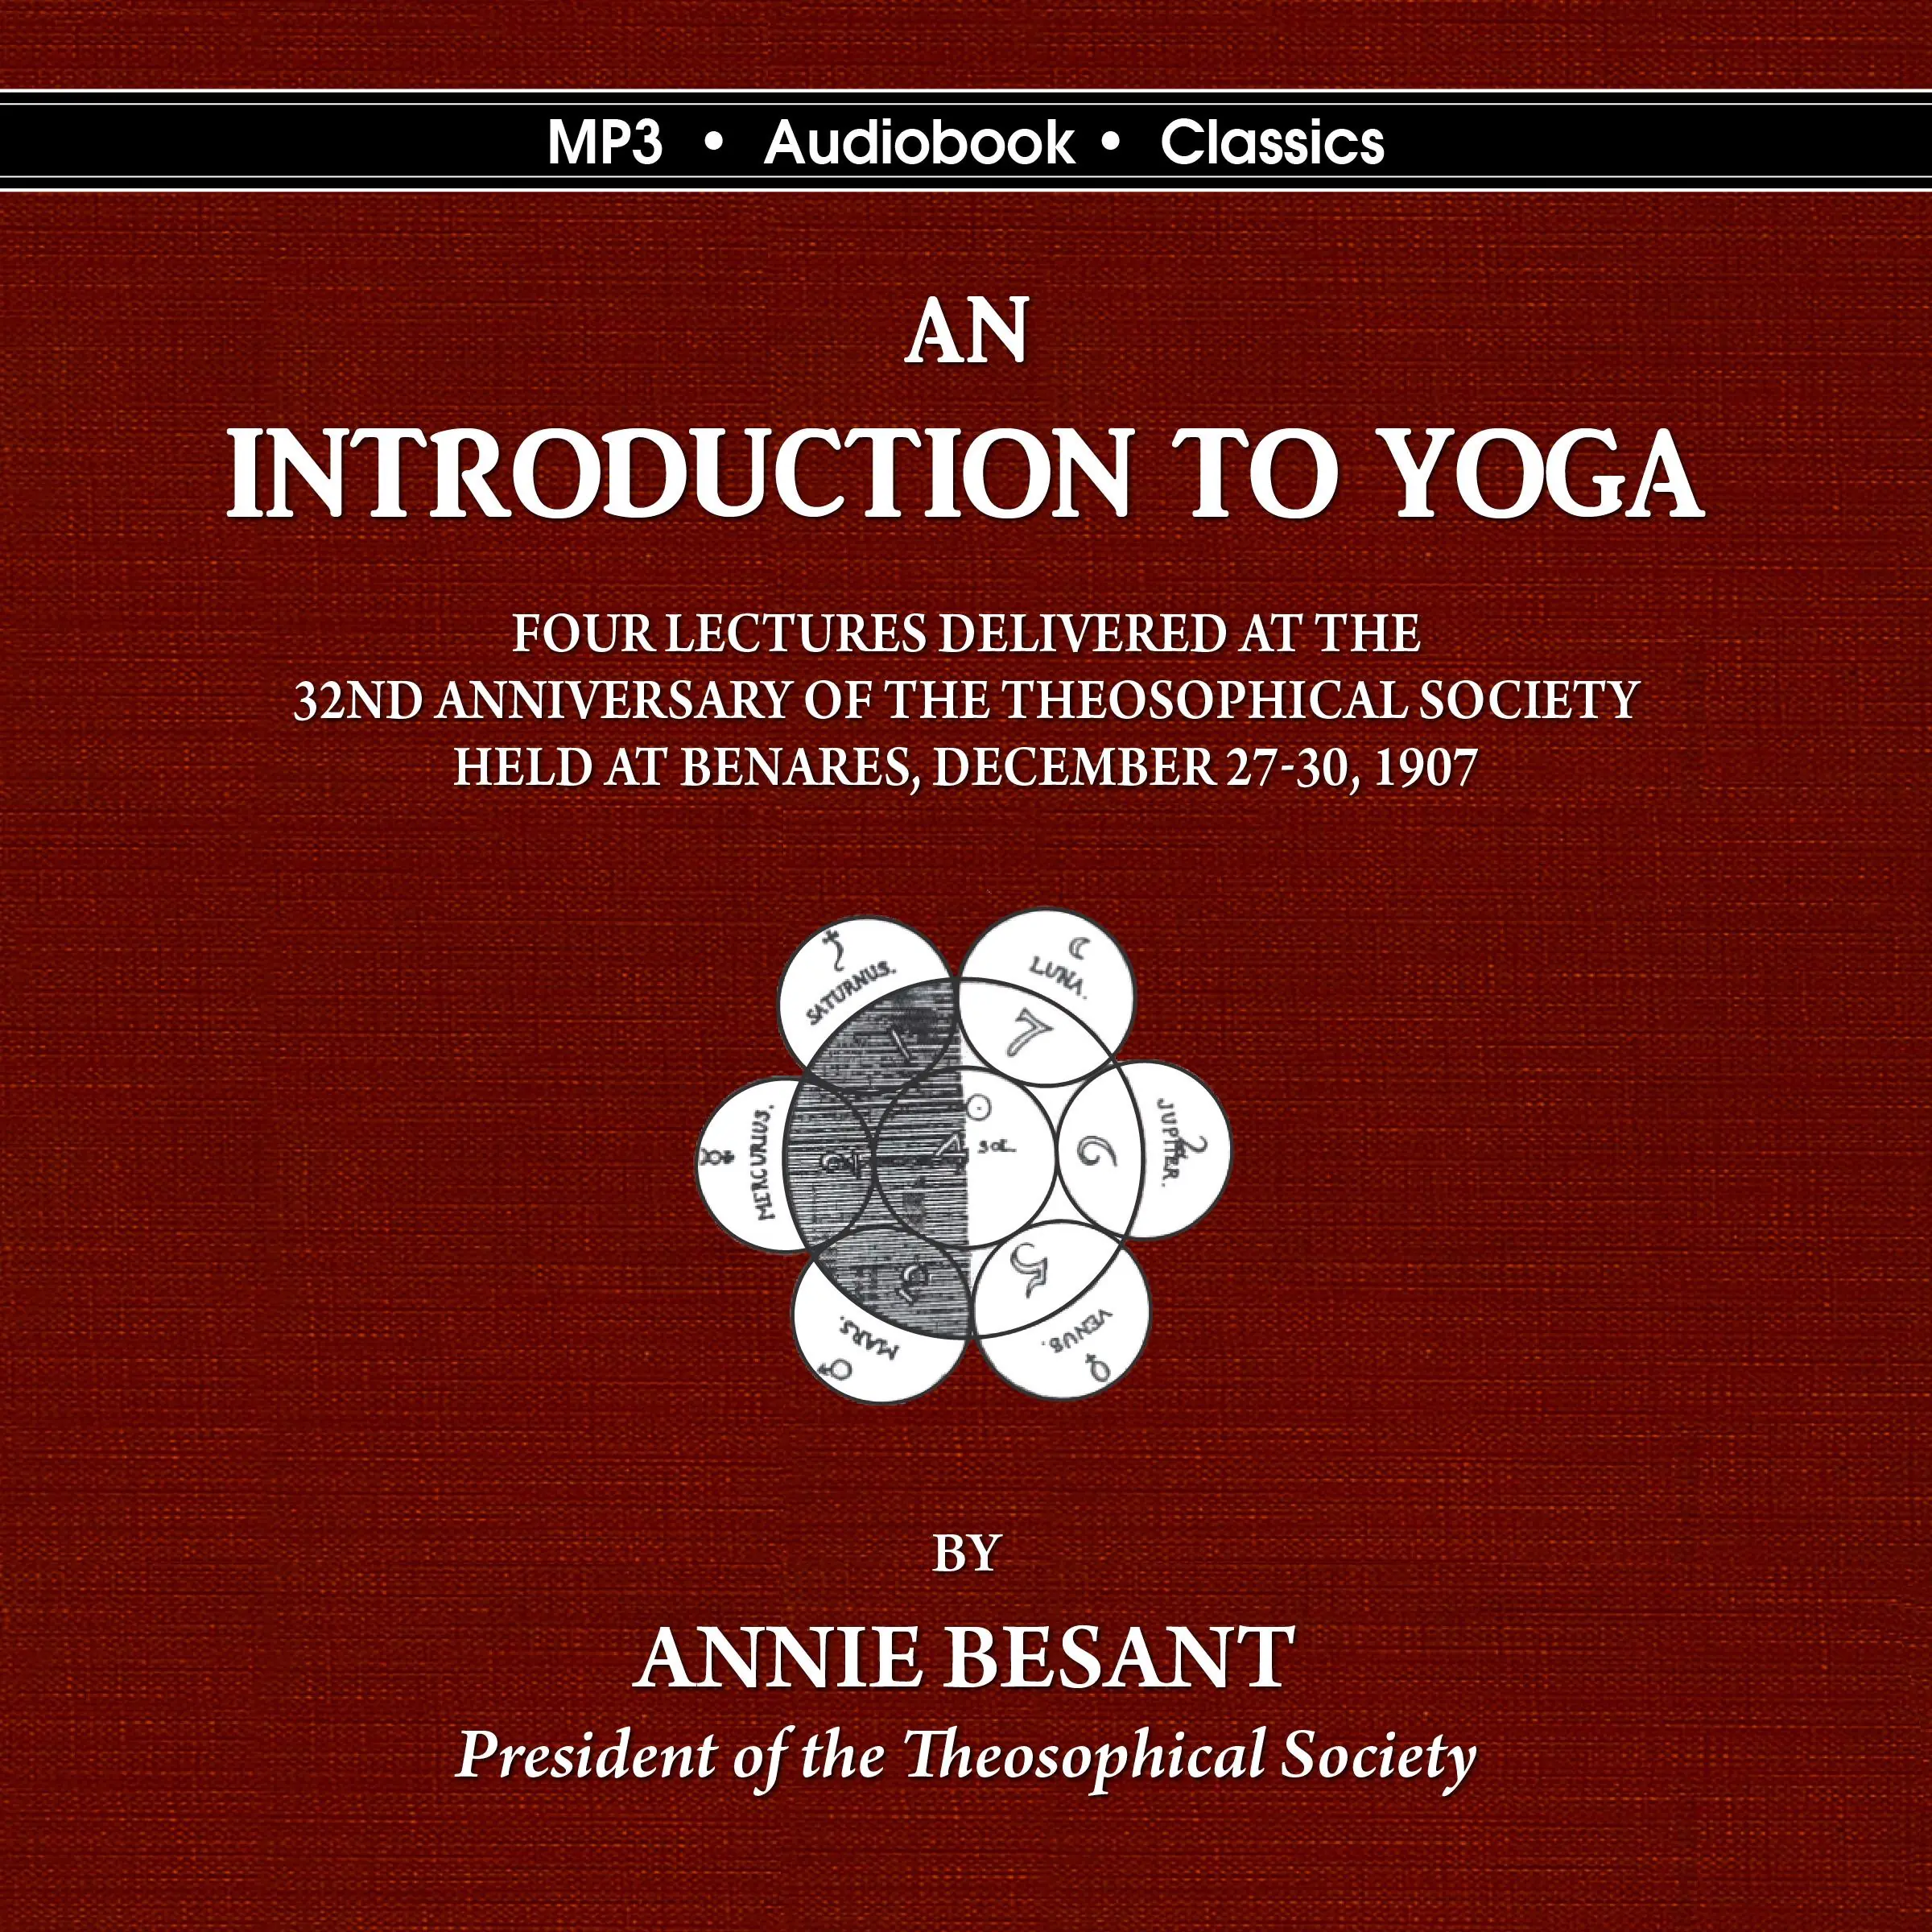 An Introduction to Yoga Audiobook by Annie Besant